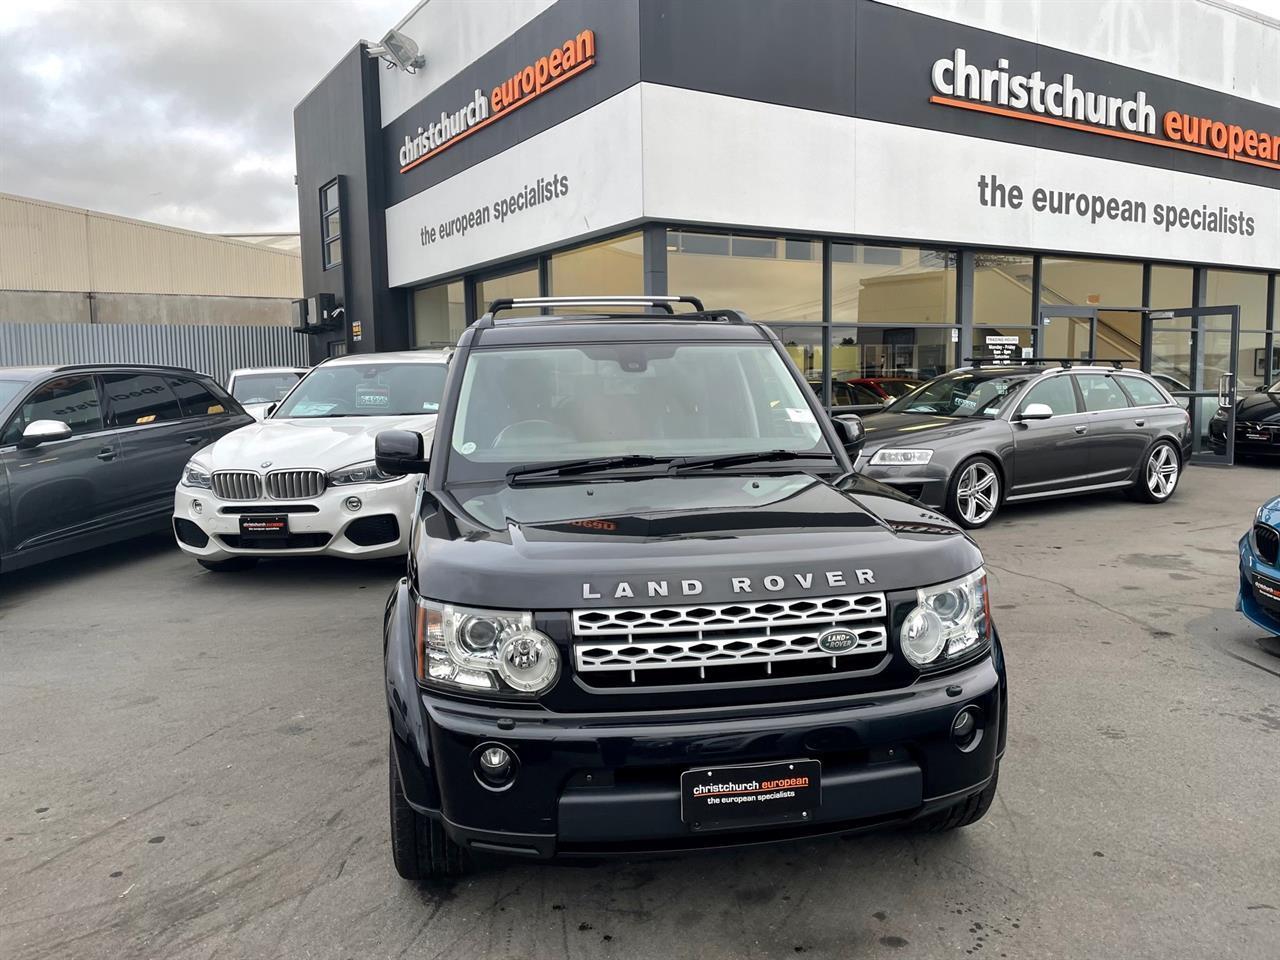 image-1, 2012 LandRover Discovery 4 5.0 V8 HSE Limited Face at Christchurch